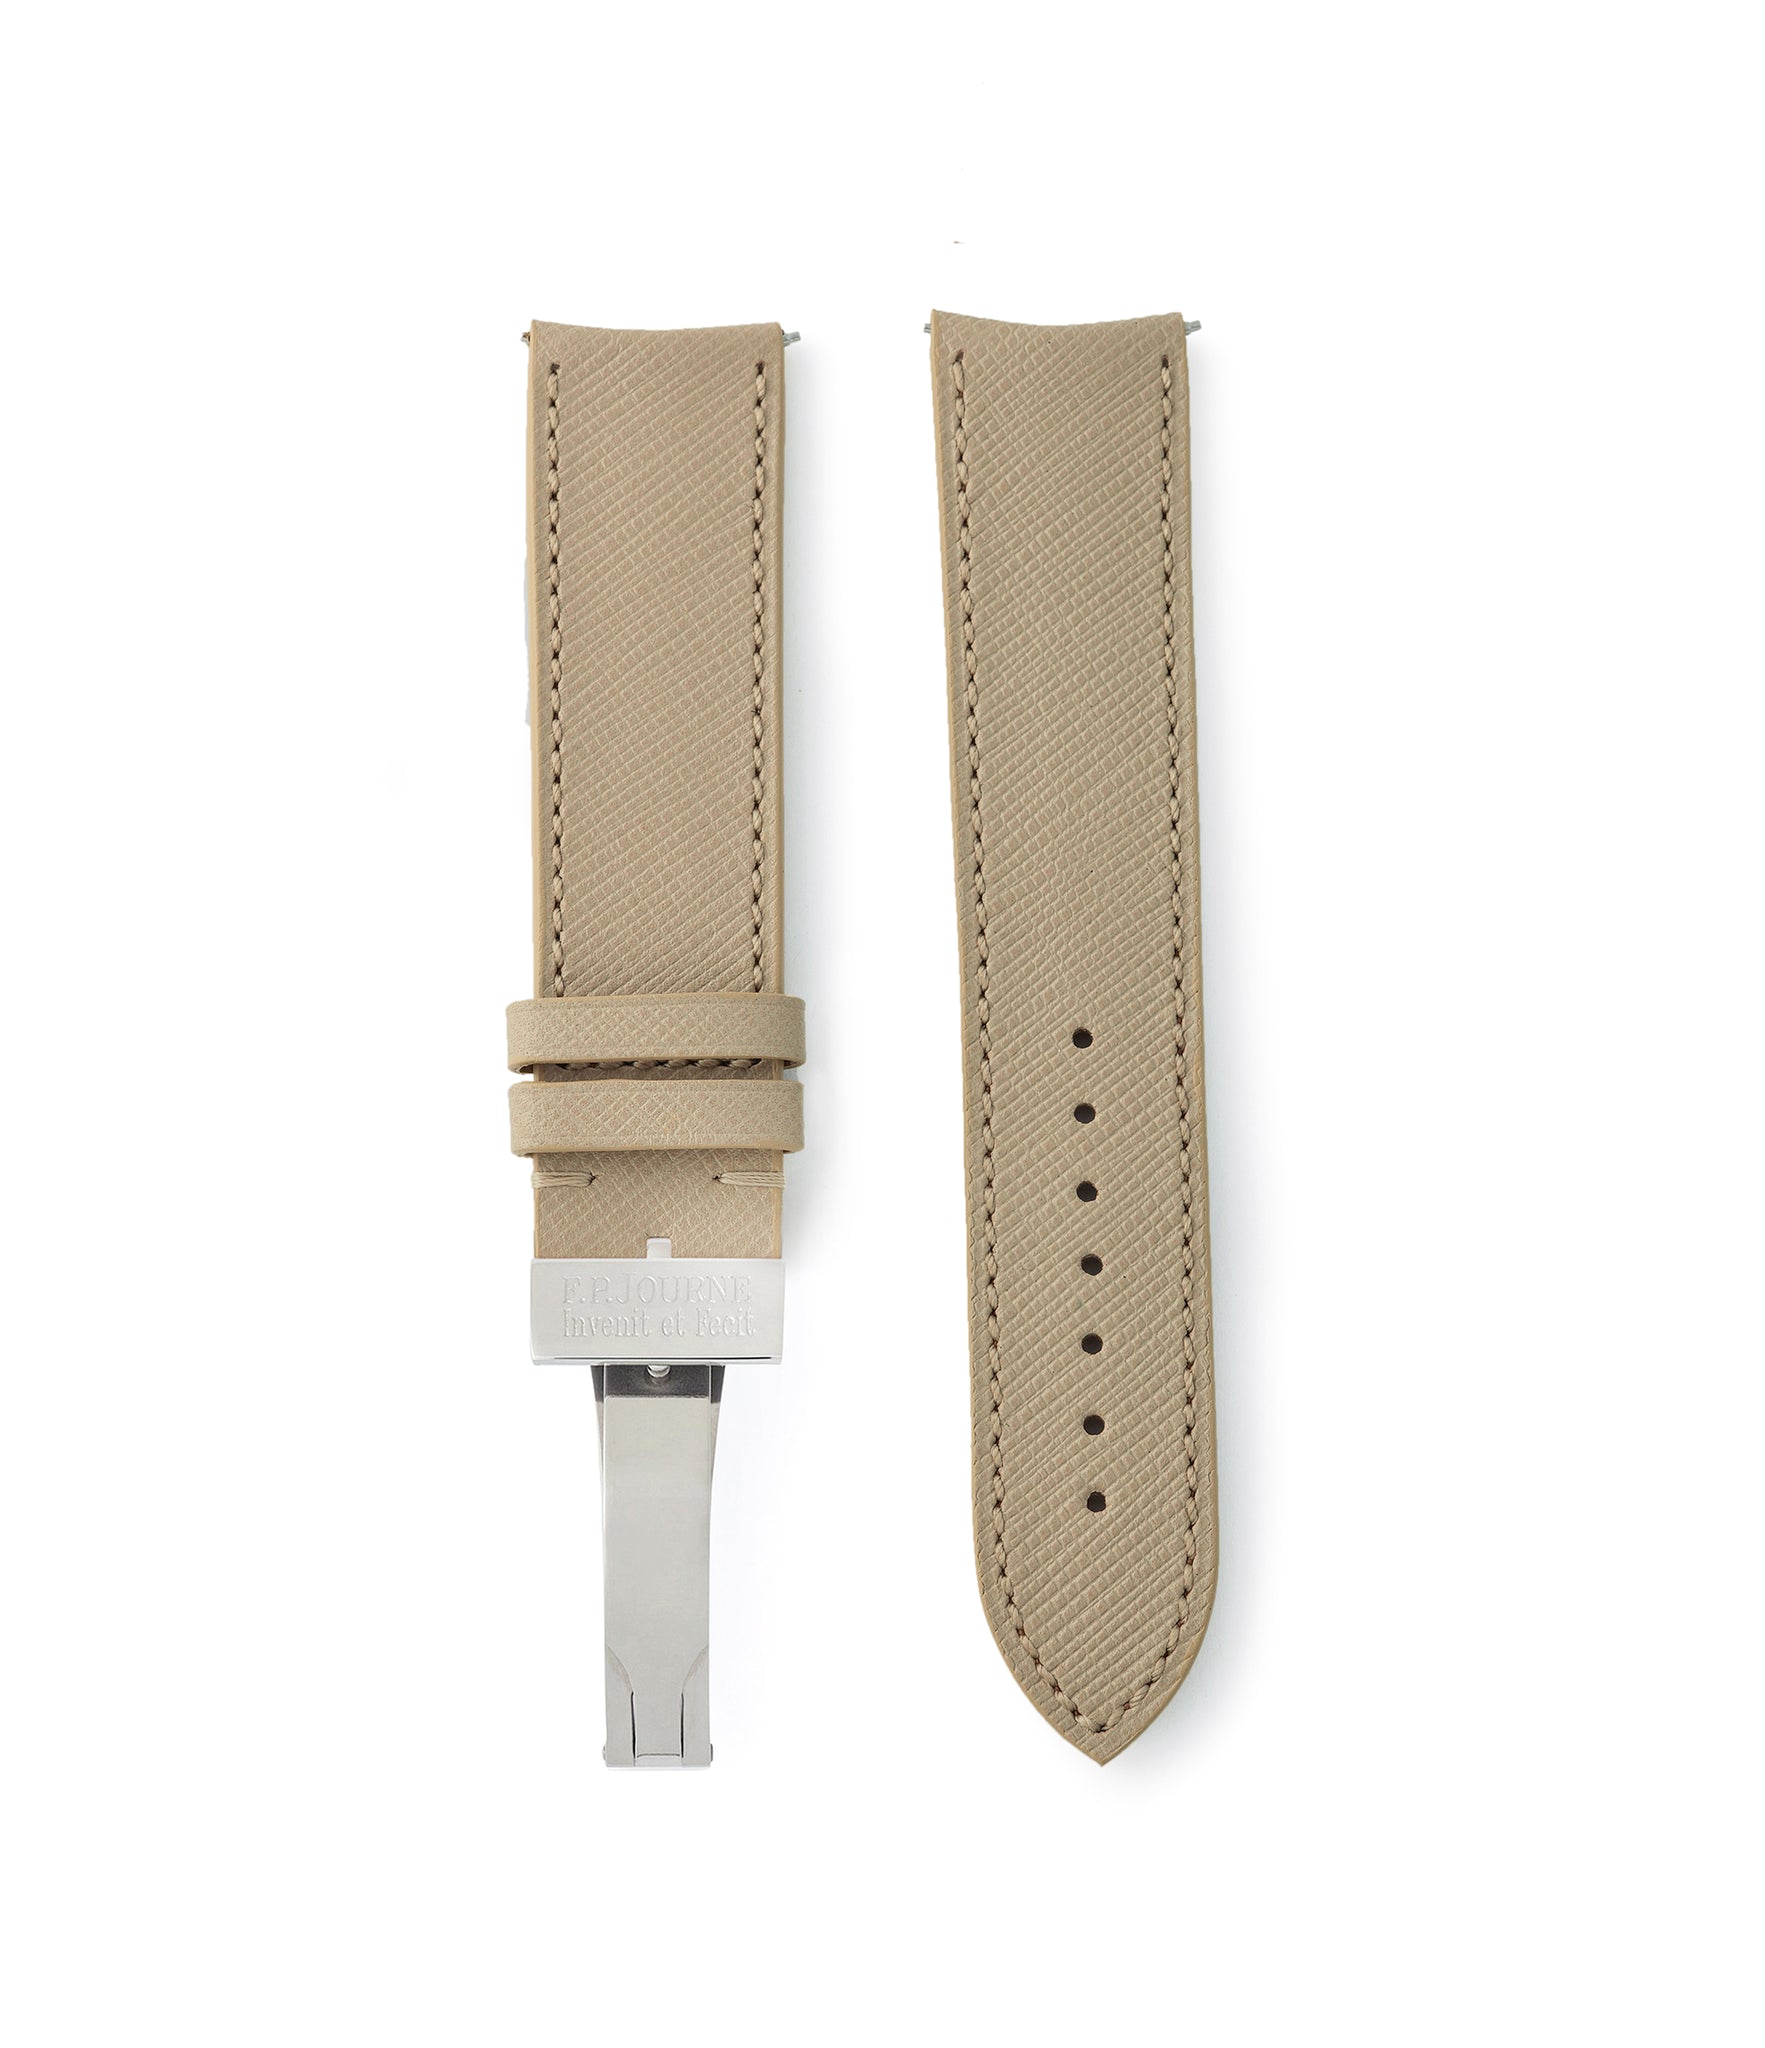 Buy saffiano quality watch strap in desert beige from A Collected Man London, in short or regular lengths. We are proud to offer these hand-crafted watch straps, thoughtfully made in Europe, to suit your watch. Available to order online for worldwide delivery.